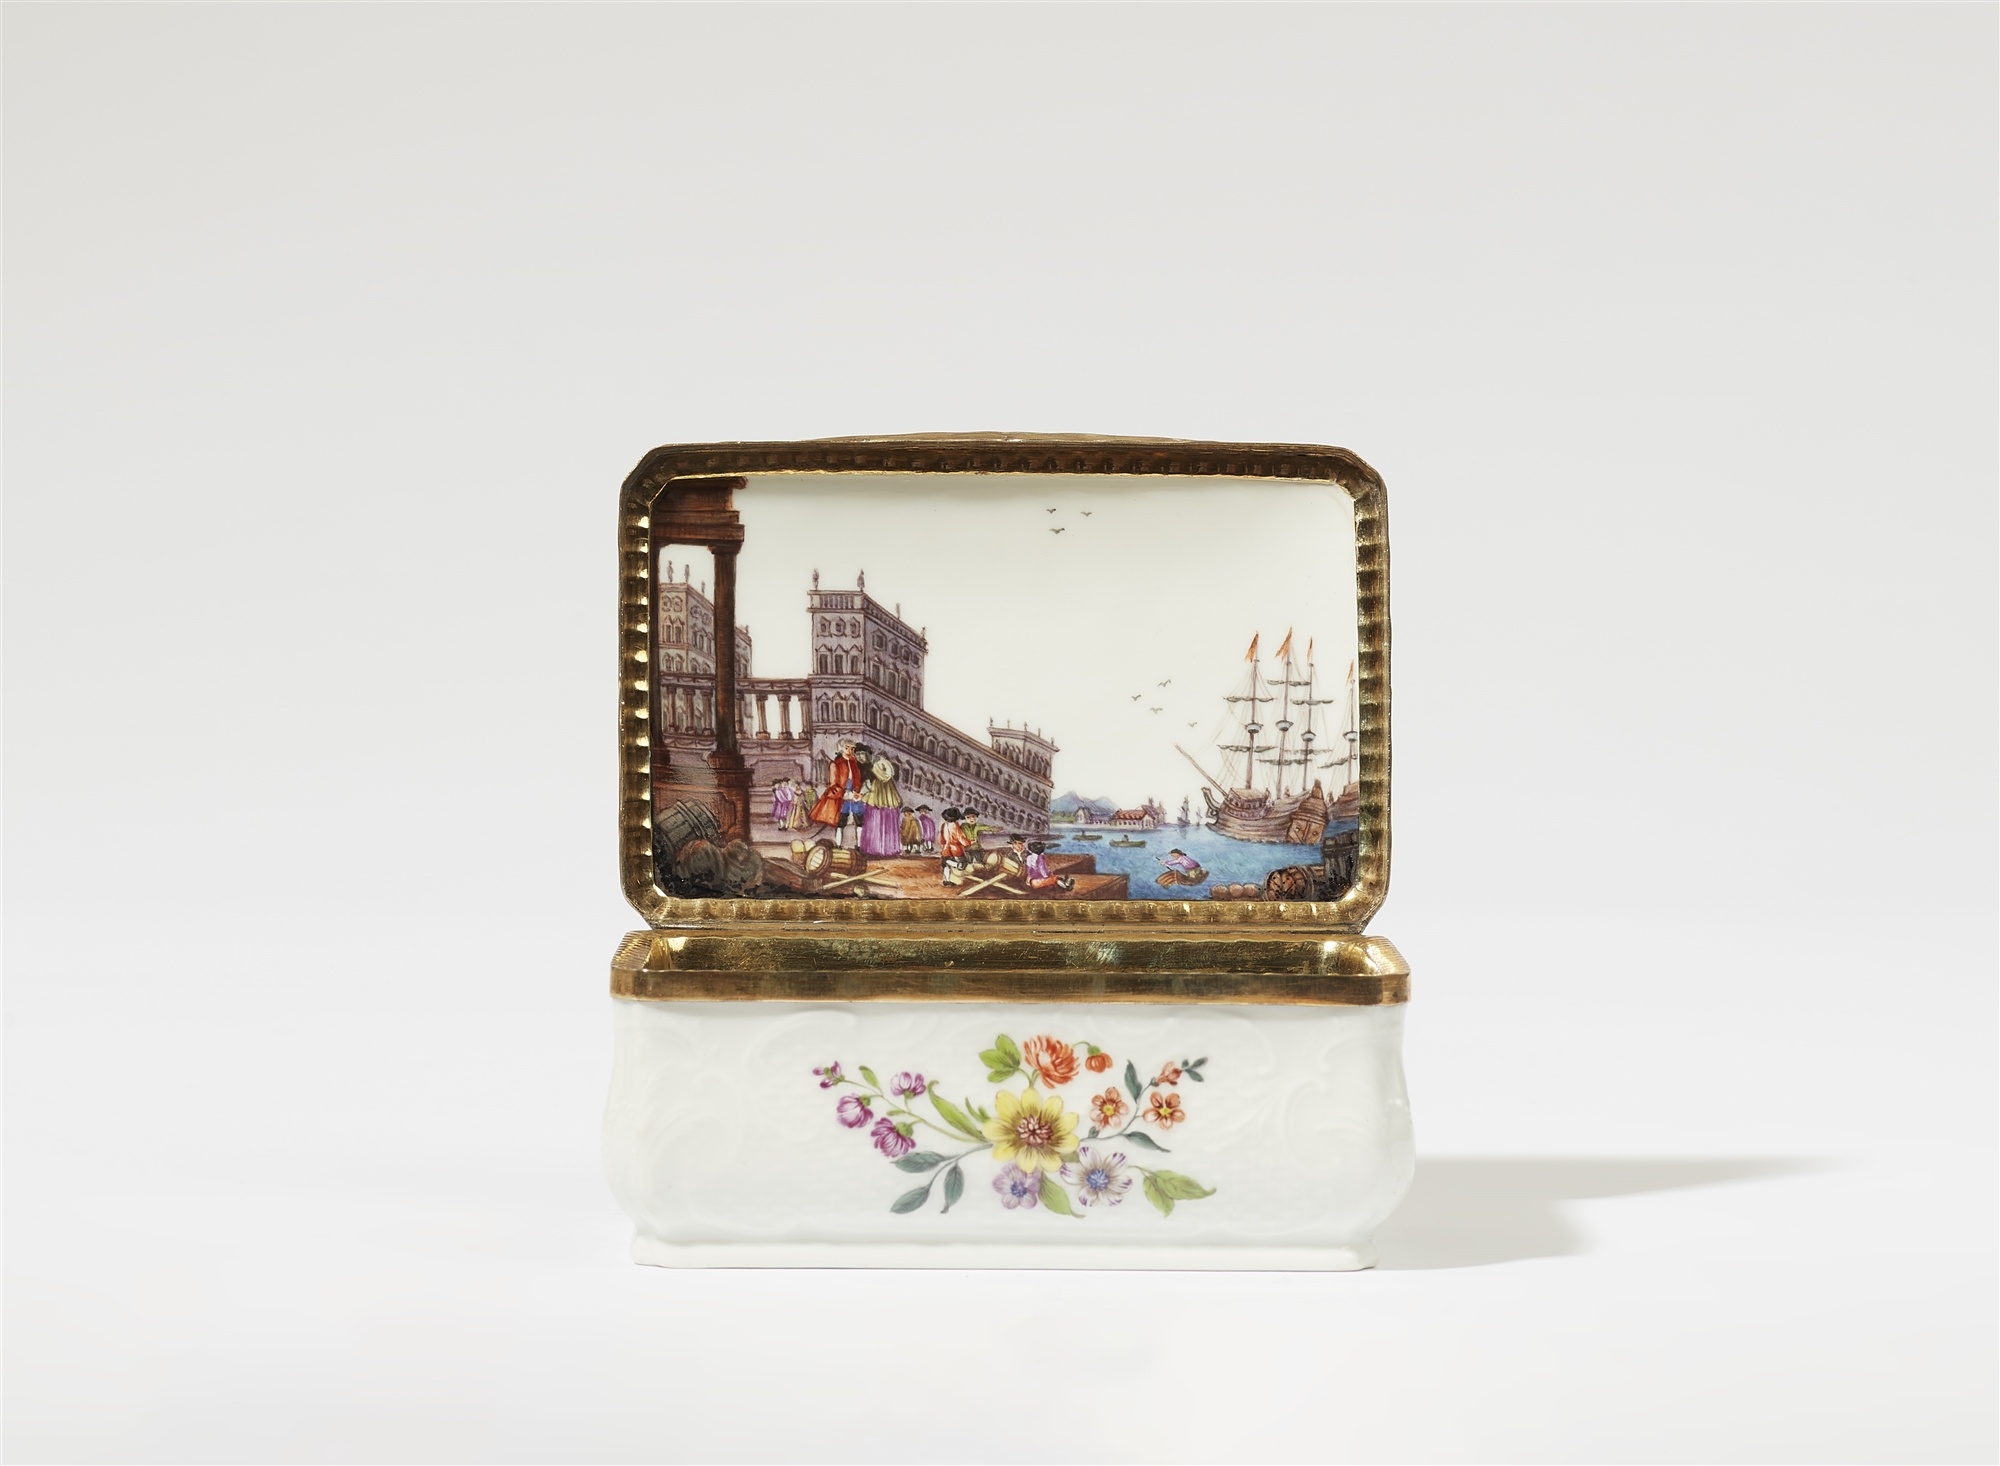 A Meissen porcelain box with a harbour scene inside the cover - Image 2 of 2